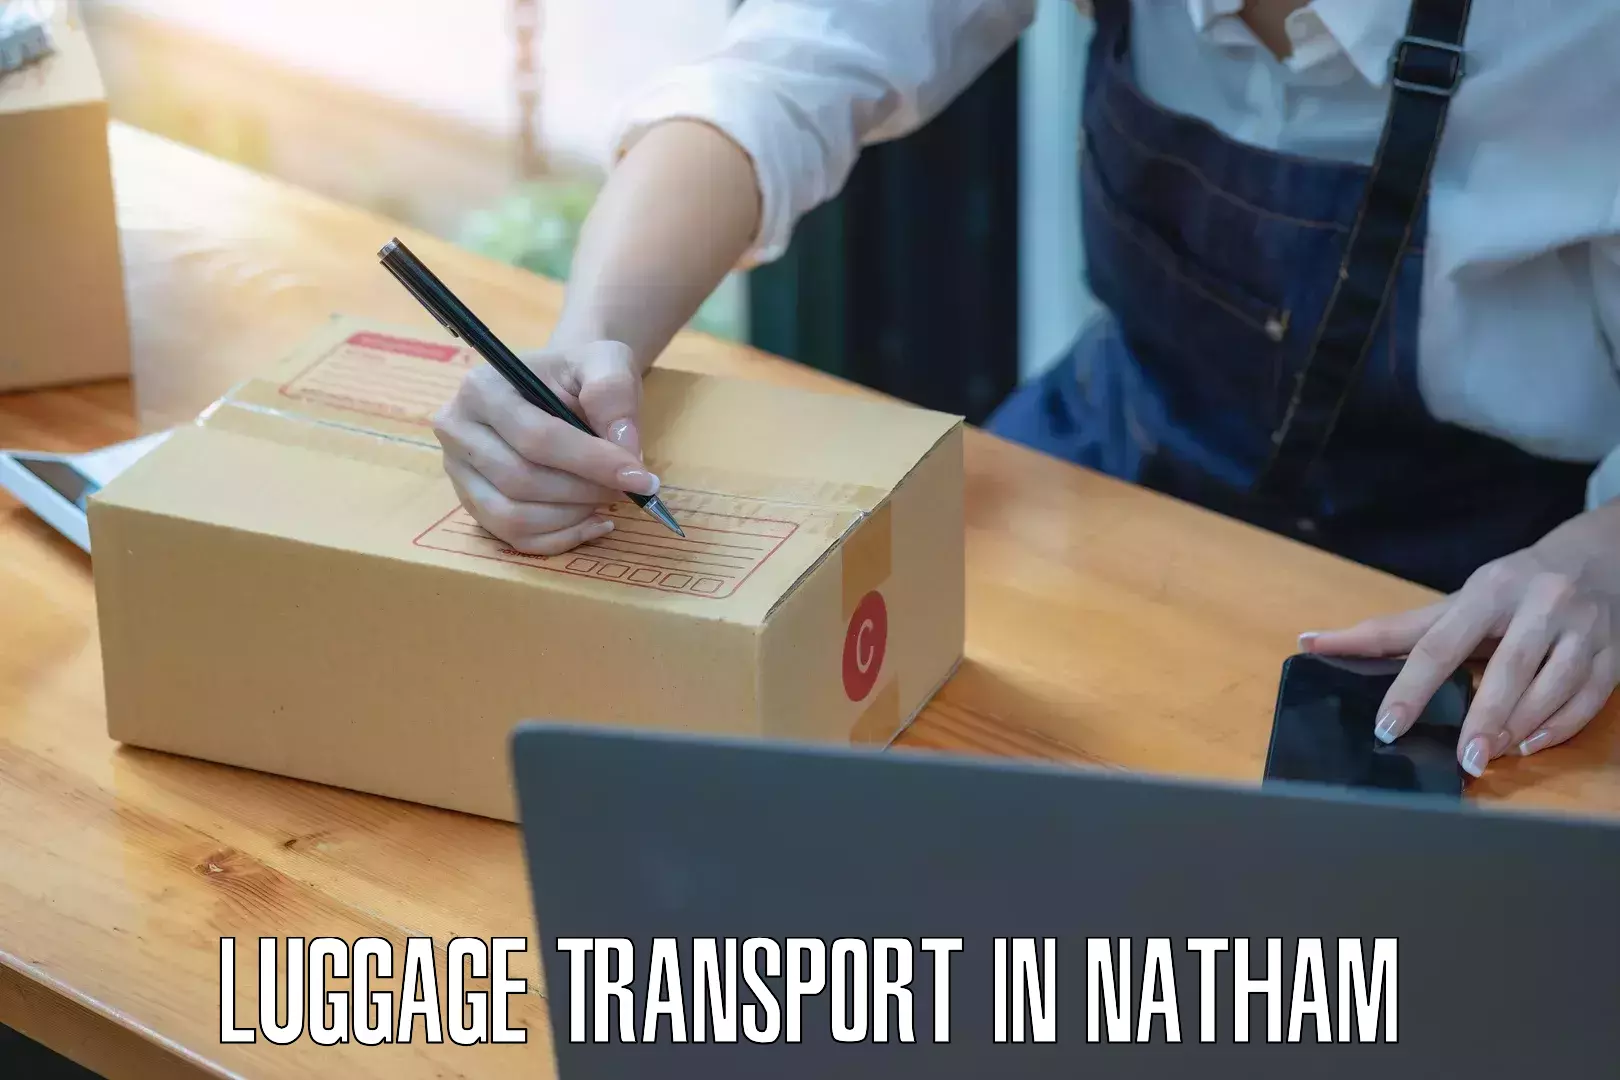 Business luggage transport in Natham